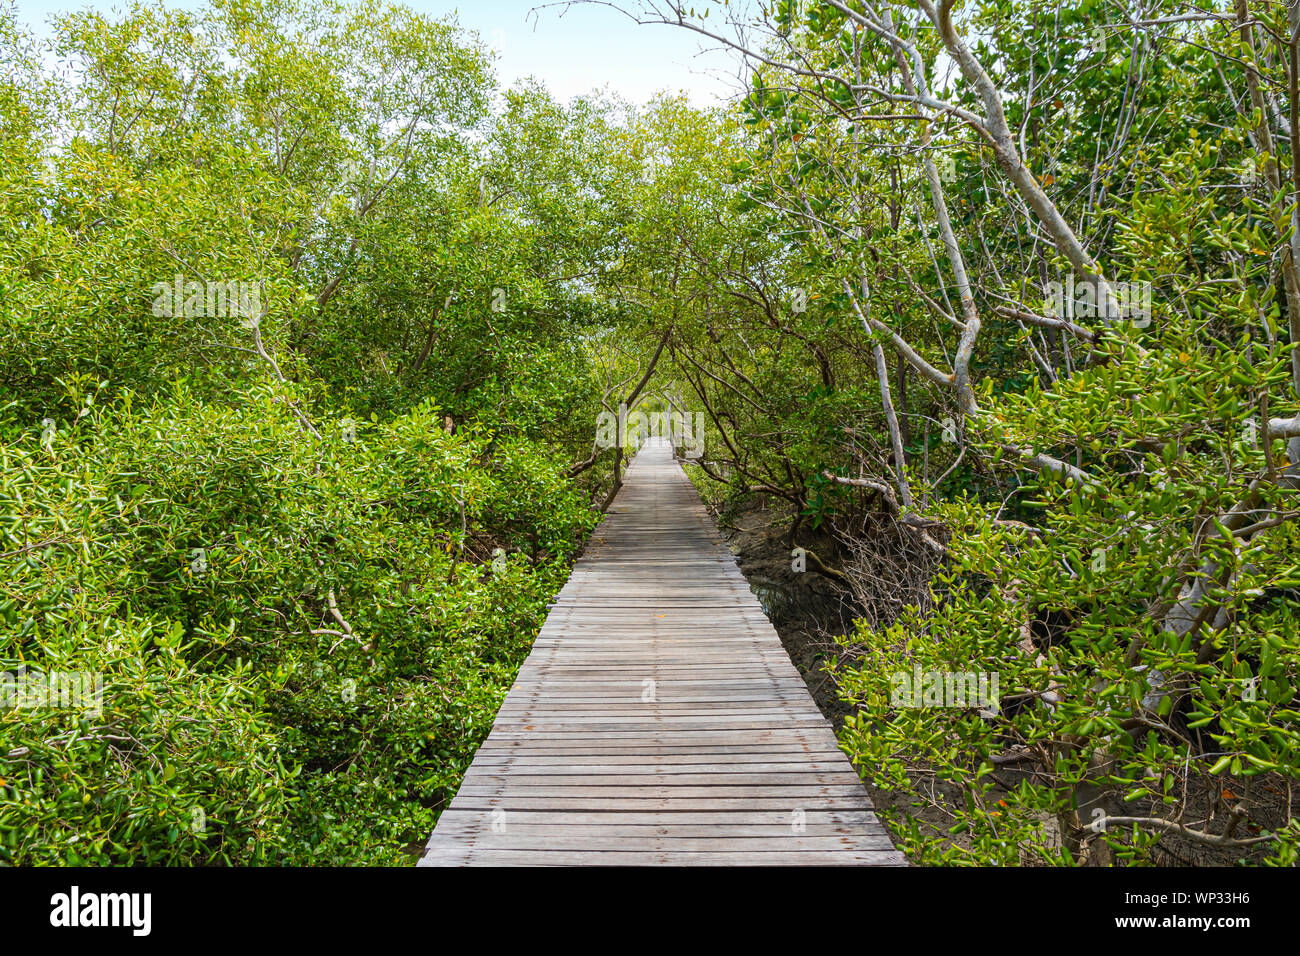 A Long wooden pathway in Mangrove forest background. Stock Photo